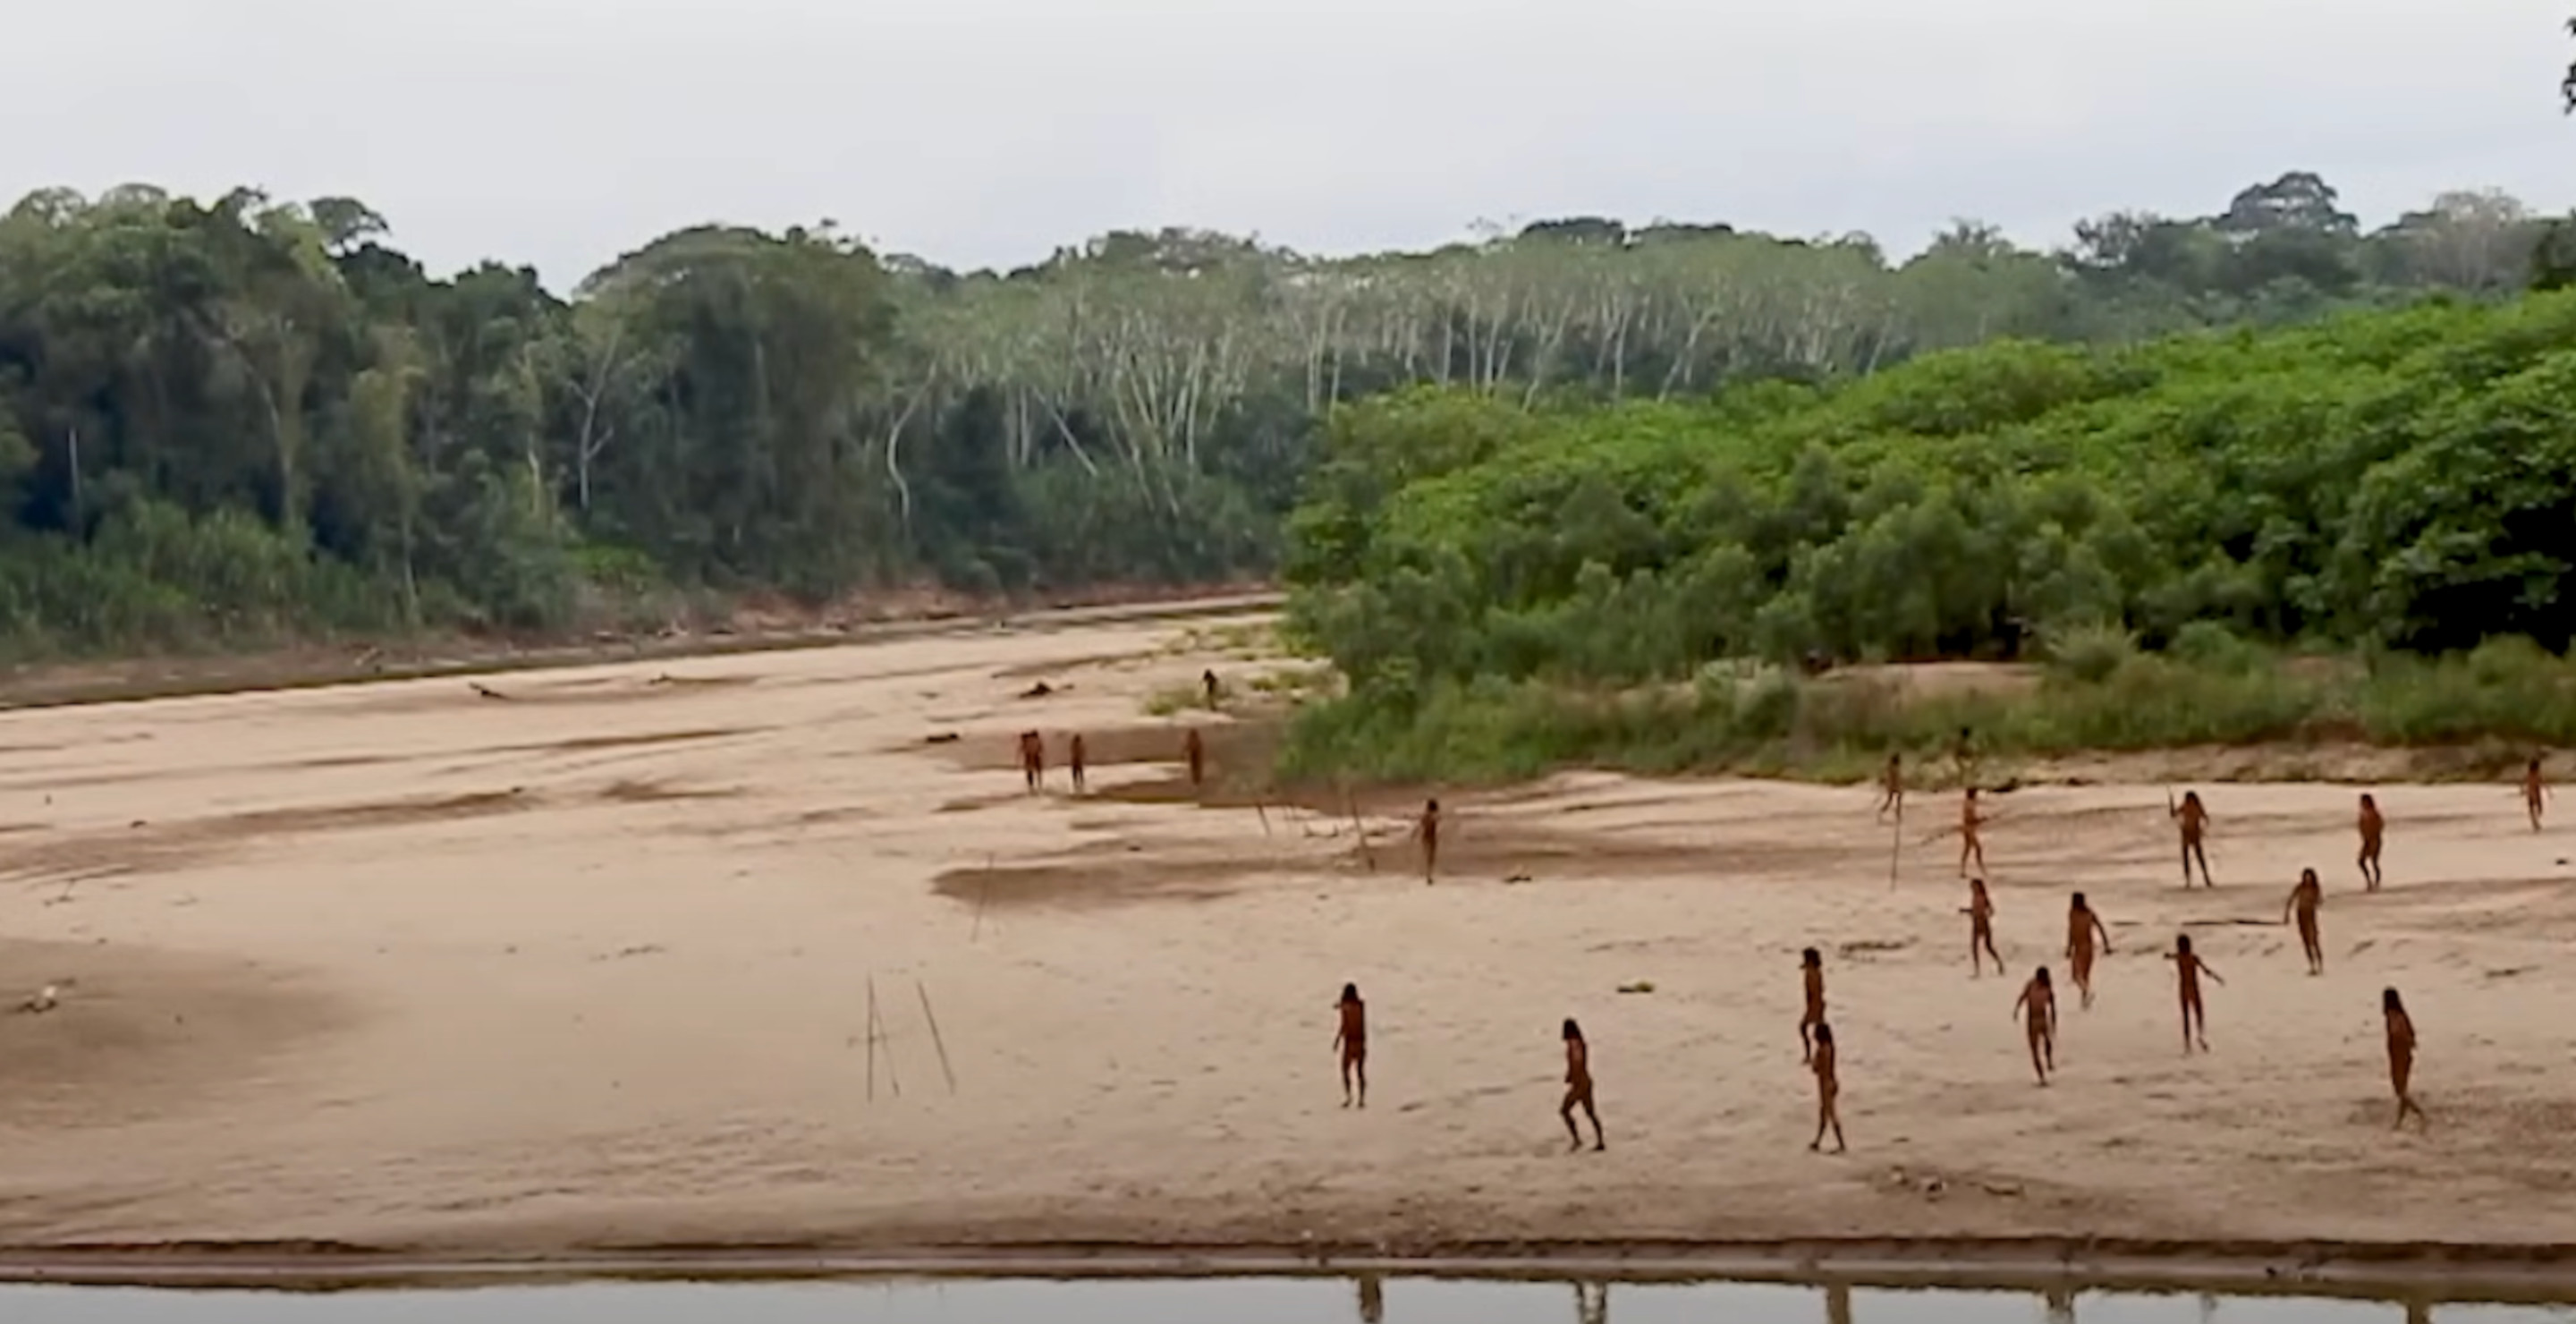 New Footage Shows Best Look Of World's Most Isolated Tribe Amid Logging Concerns